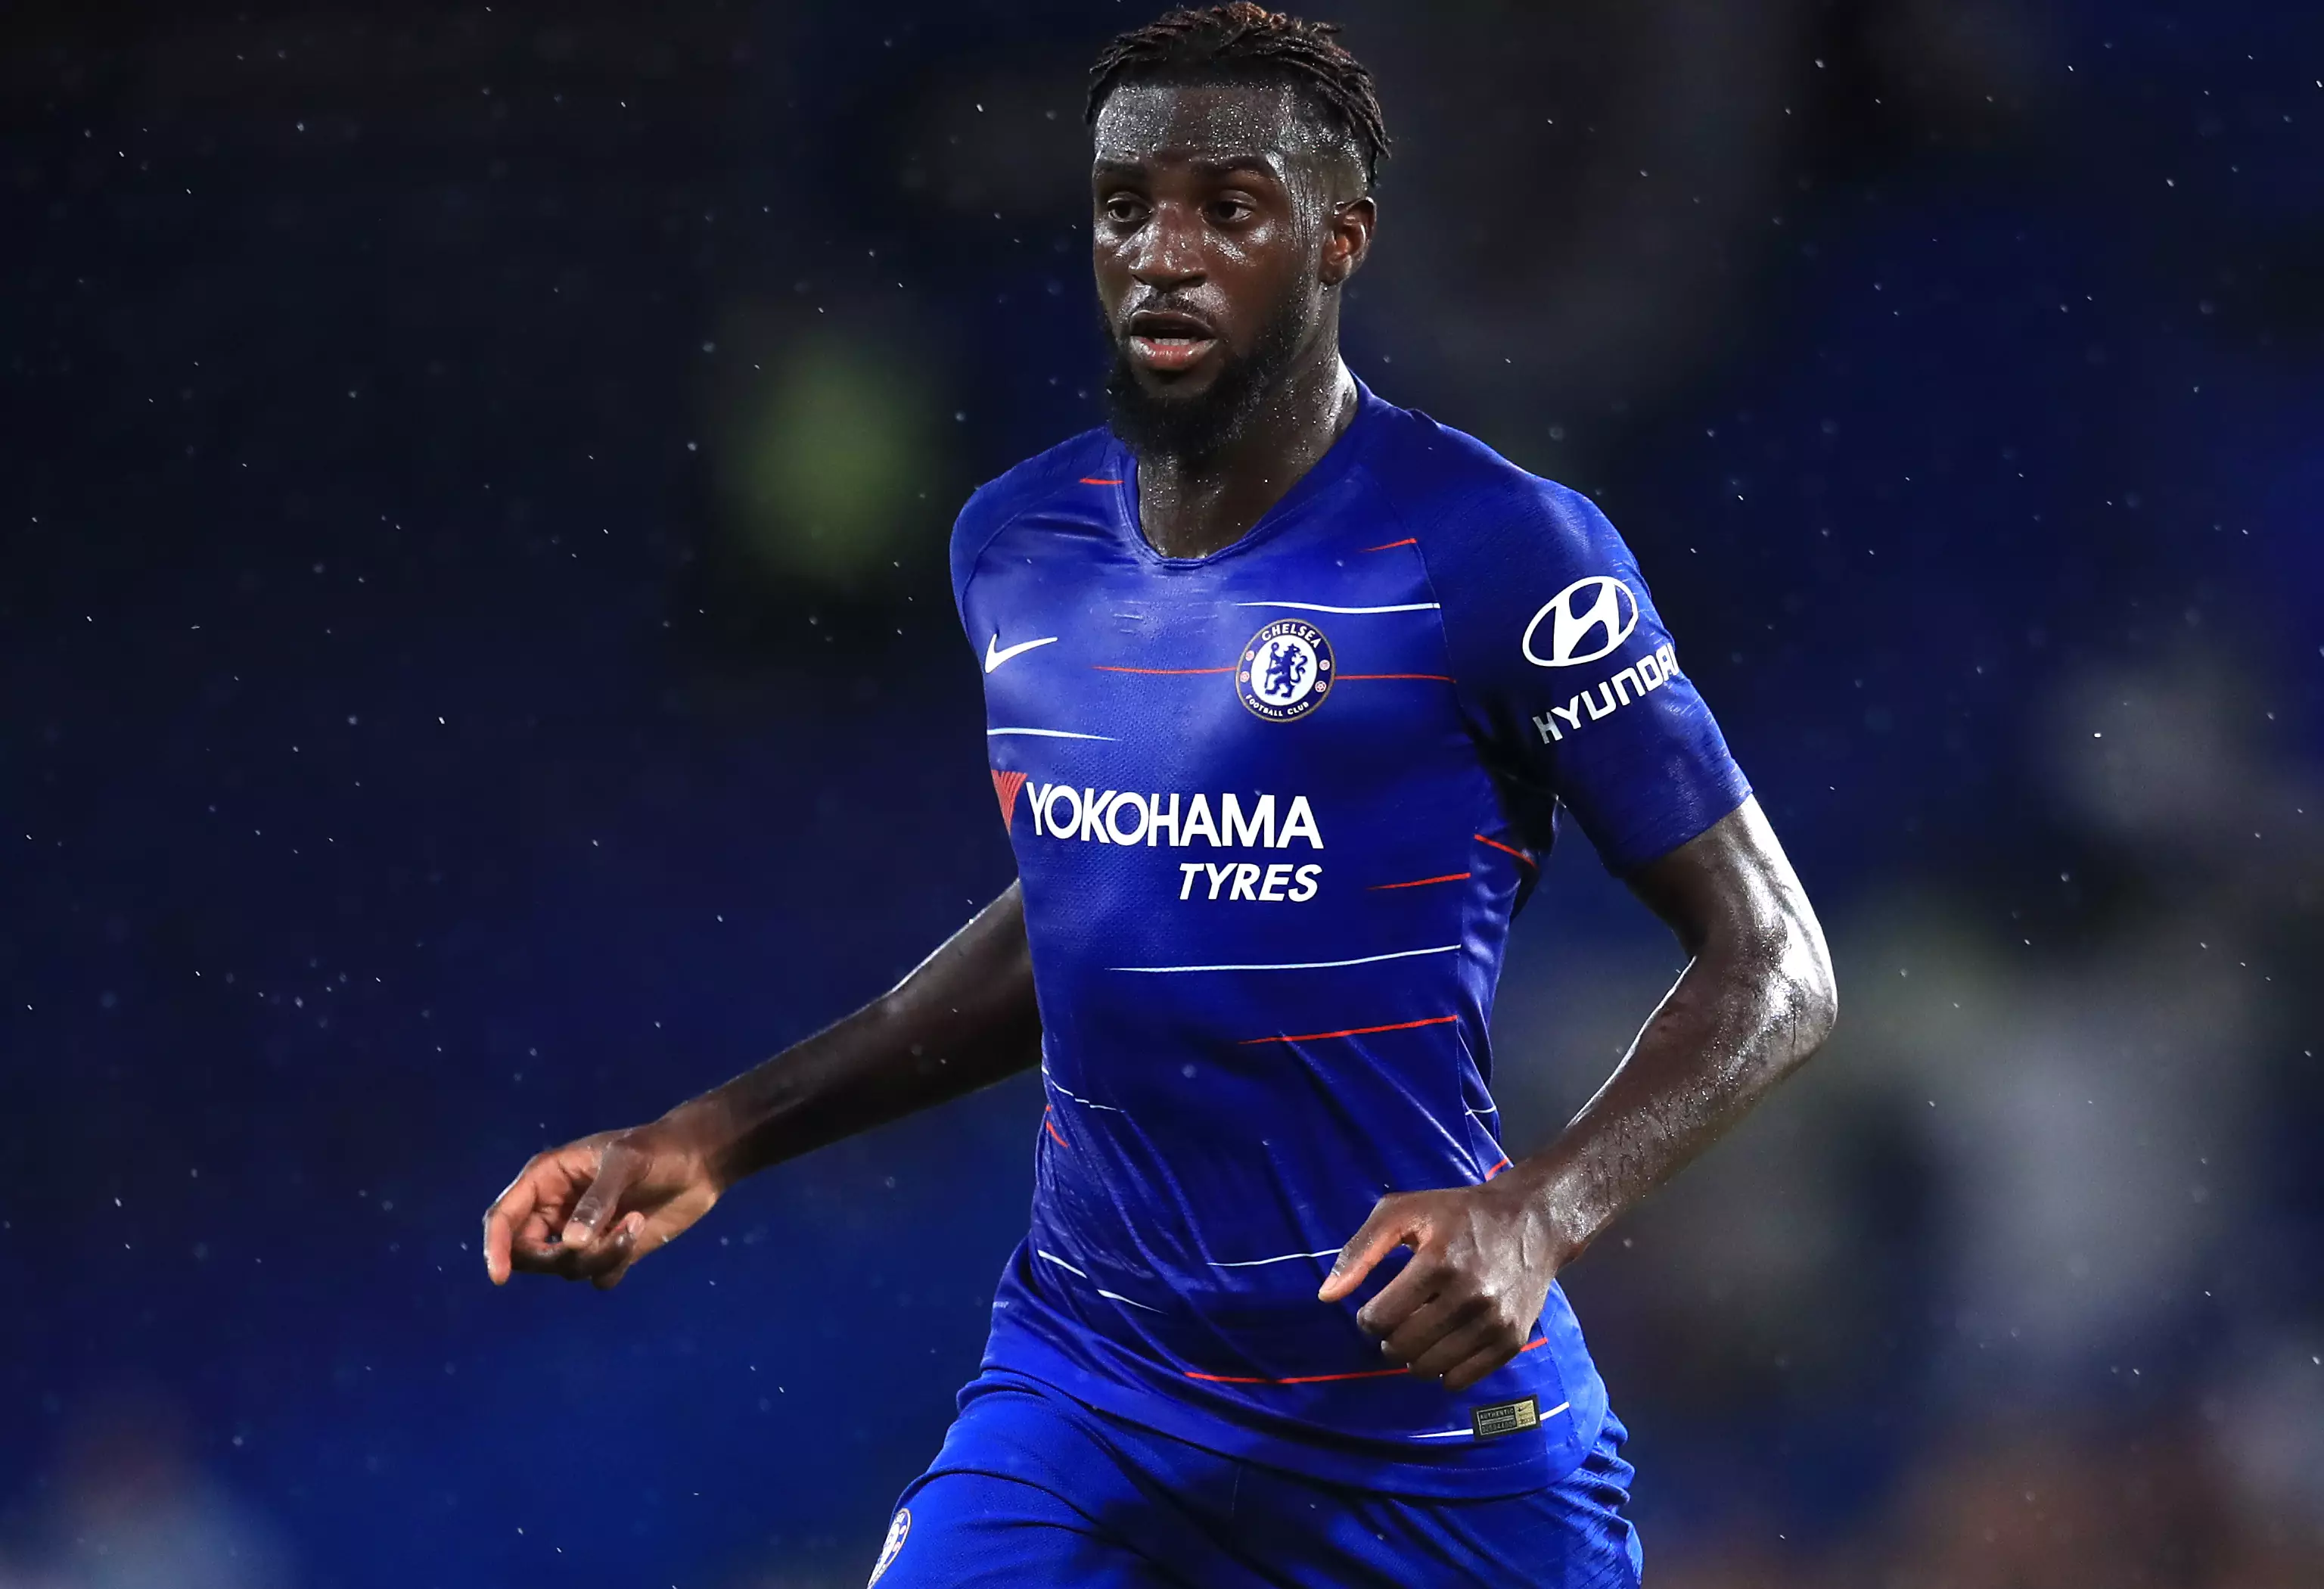 Chelsea fans won't expect to see Bakayoko back playing for their club. Image: PA Images